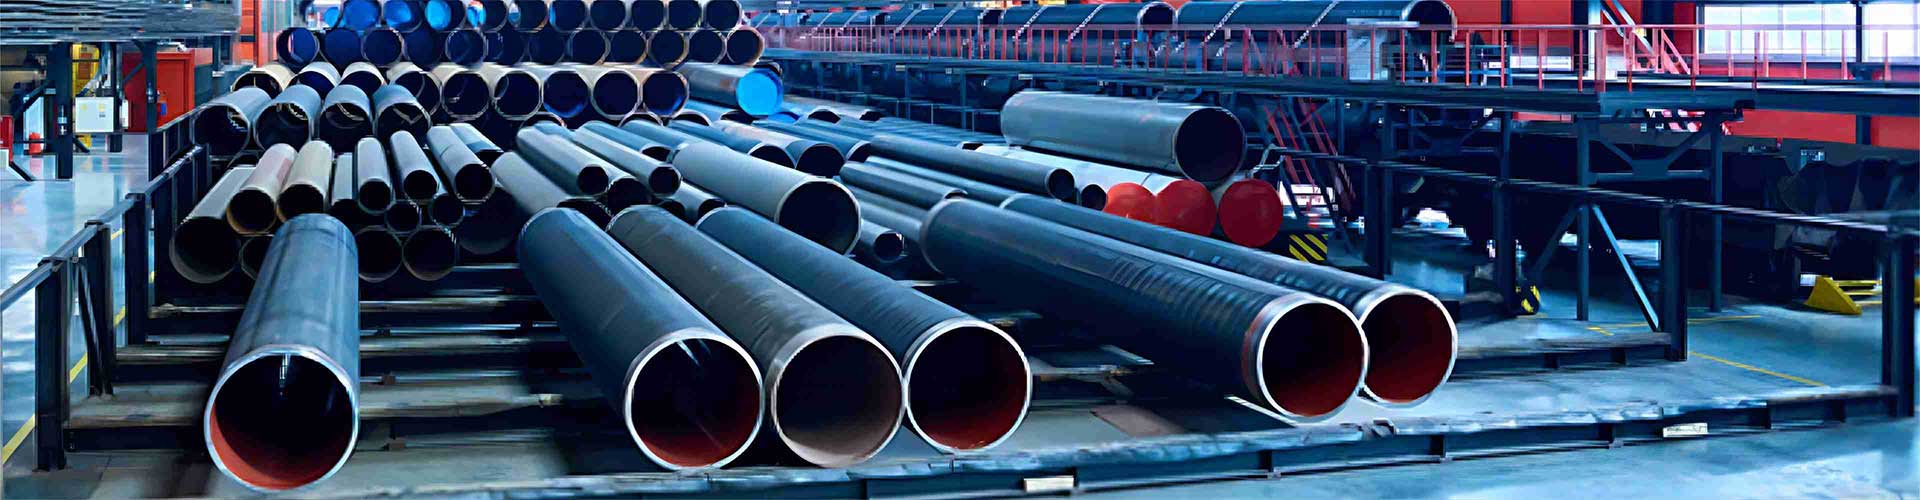 Pipe fitting,Alloy steel pipe,Epoxy pipe